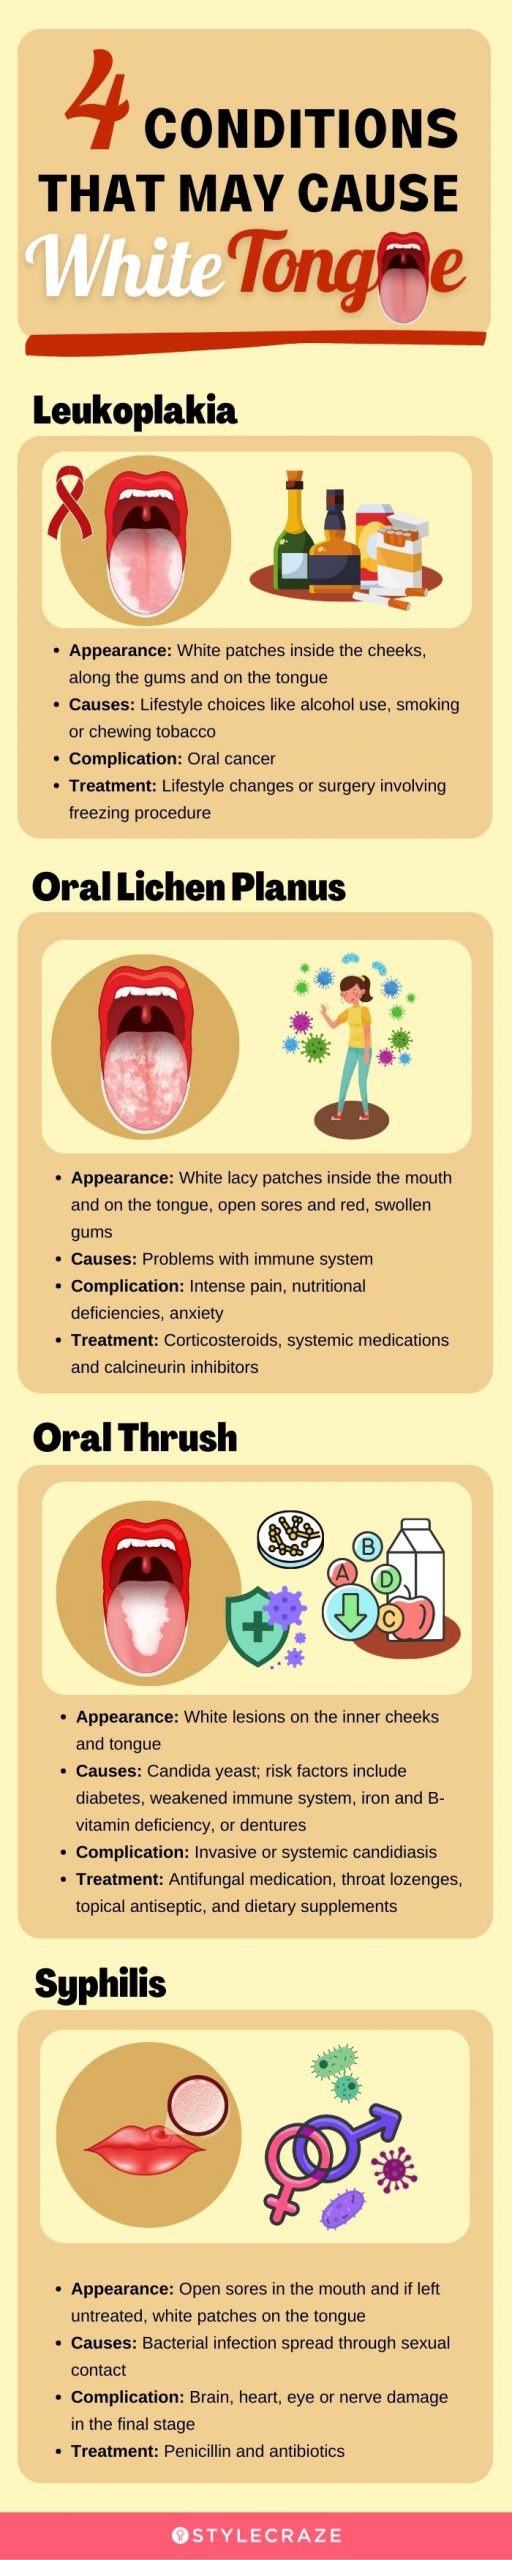 4 conditions that may cause white tongue [infographic]